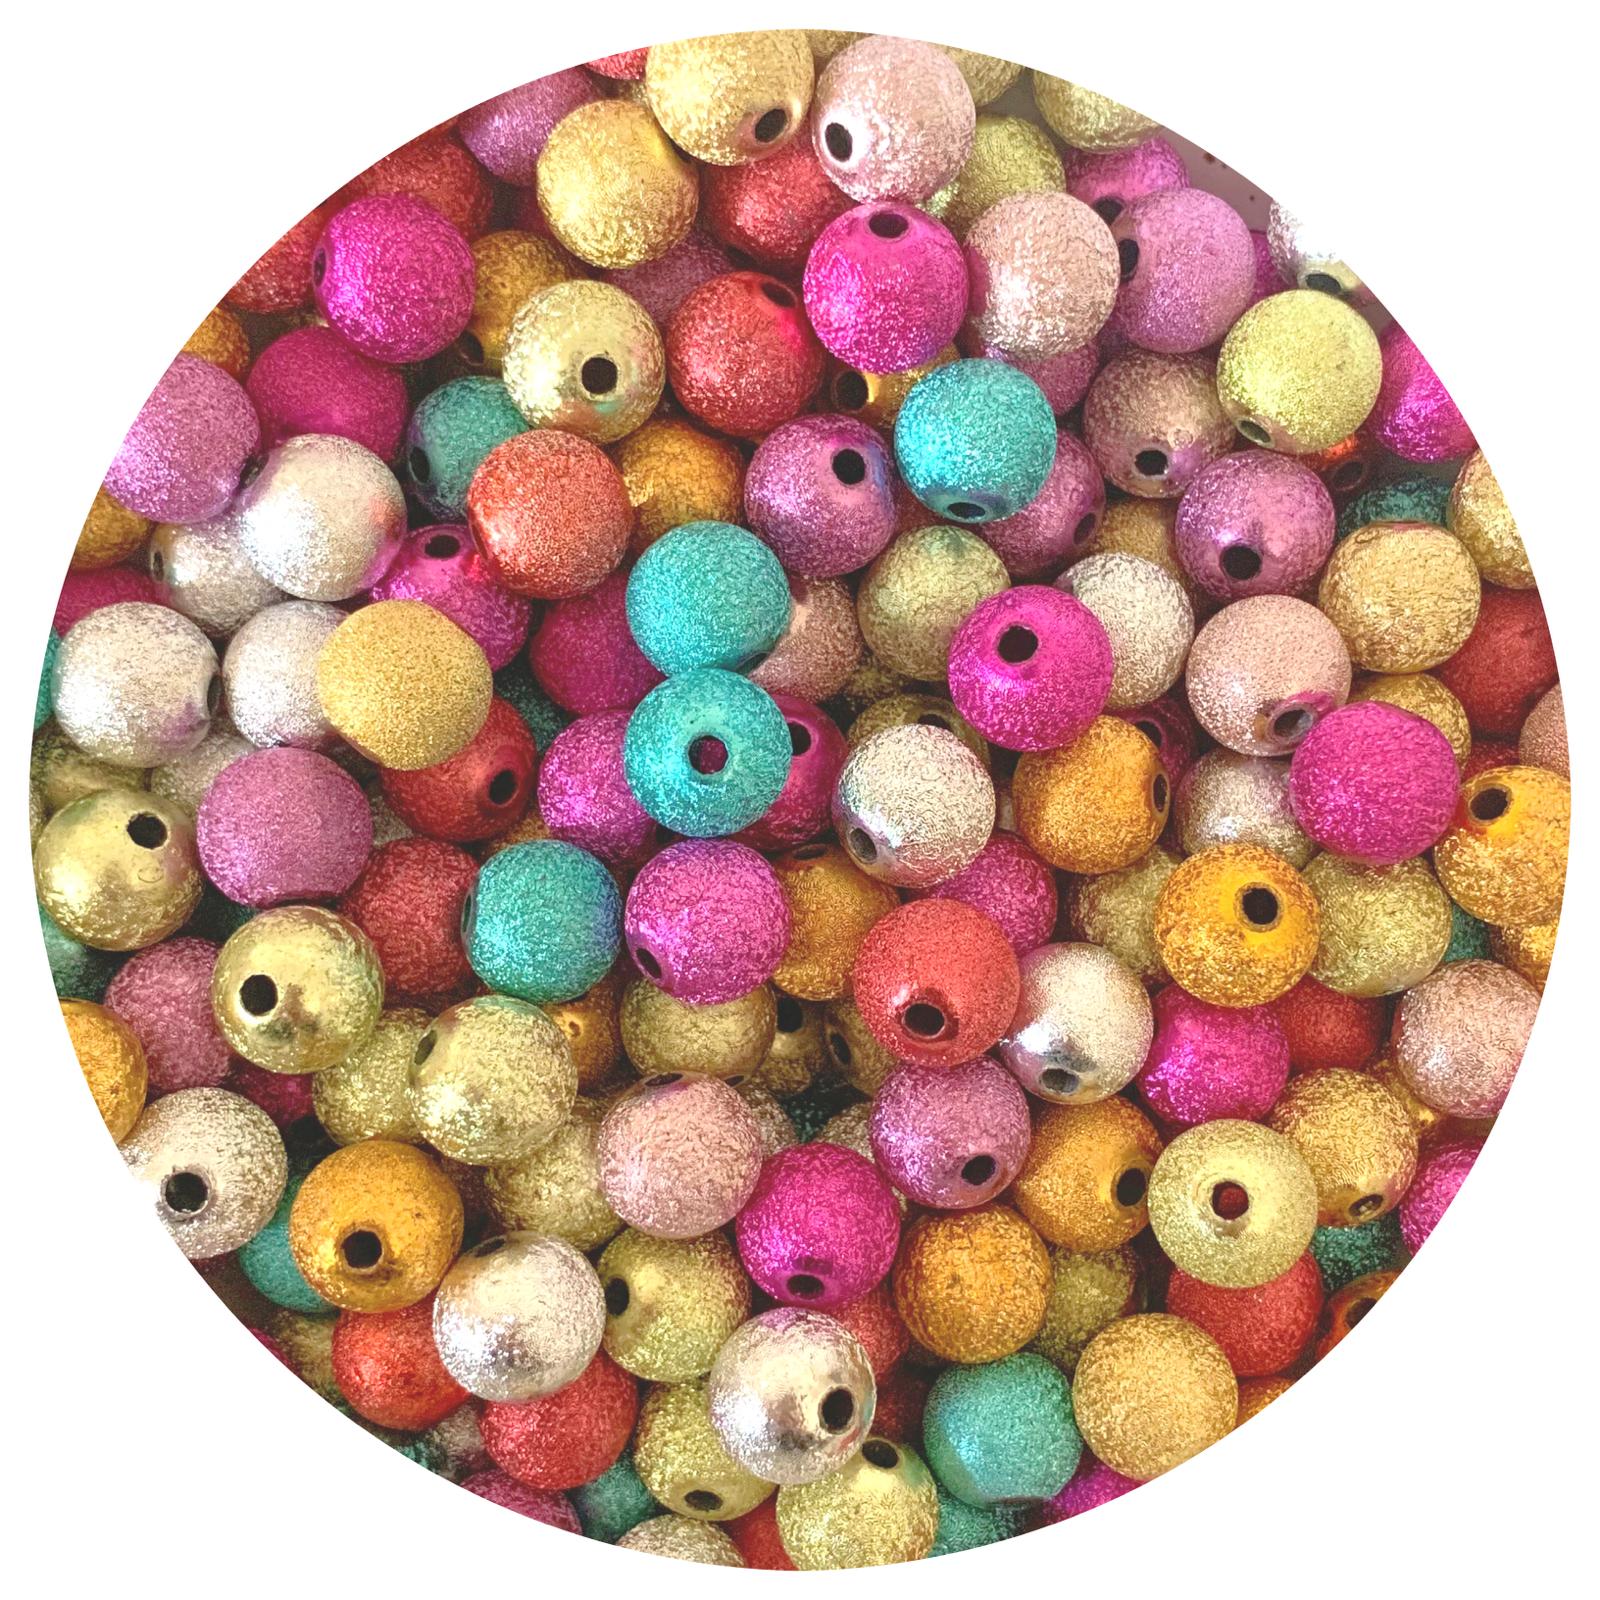 12mm Mixed Stardust Round Acrylic Beads - 20 Beads